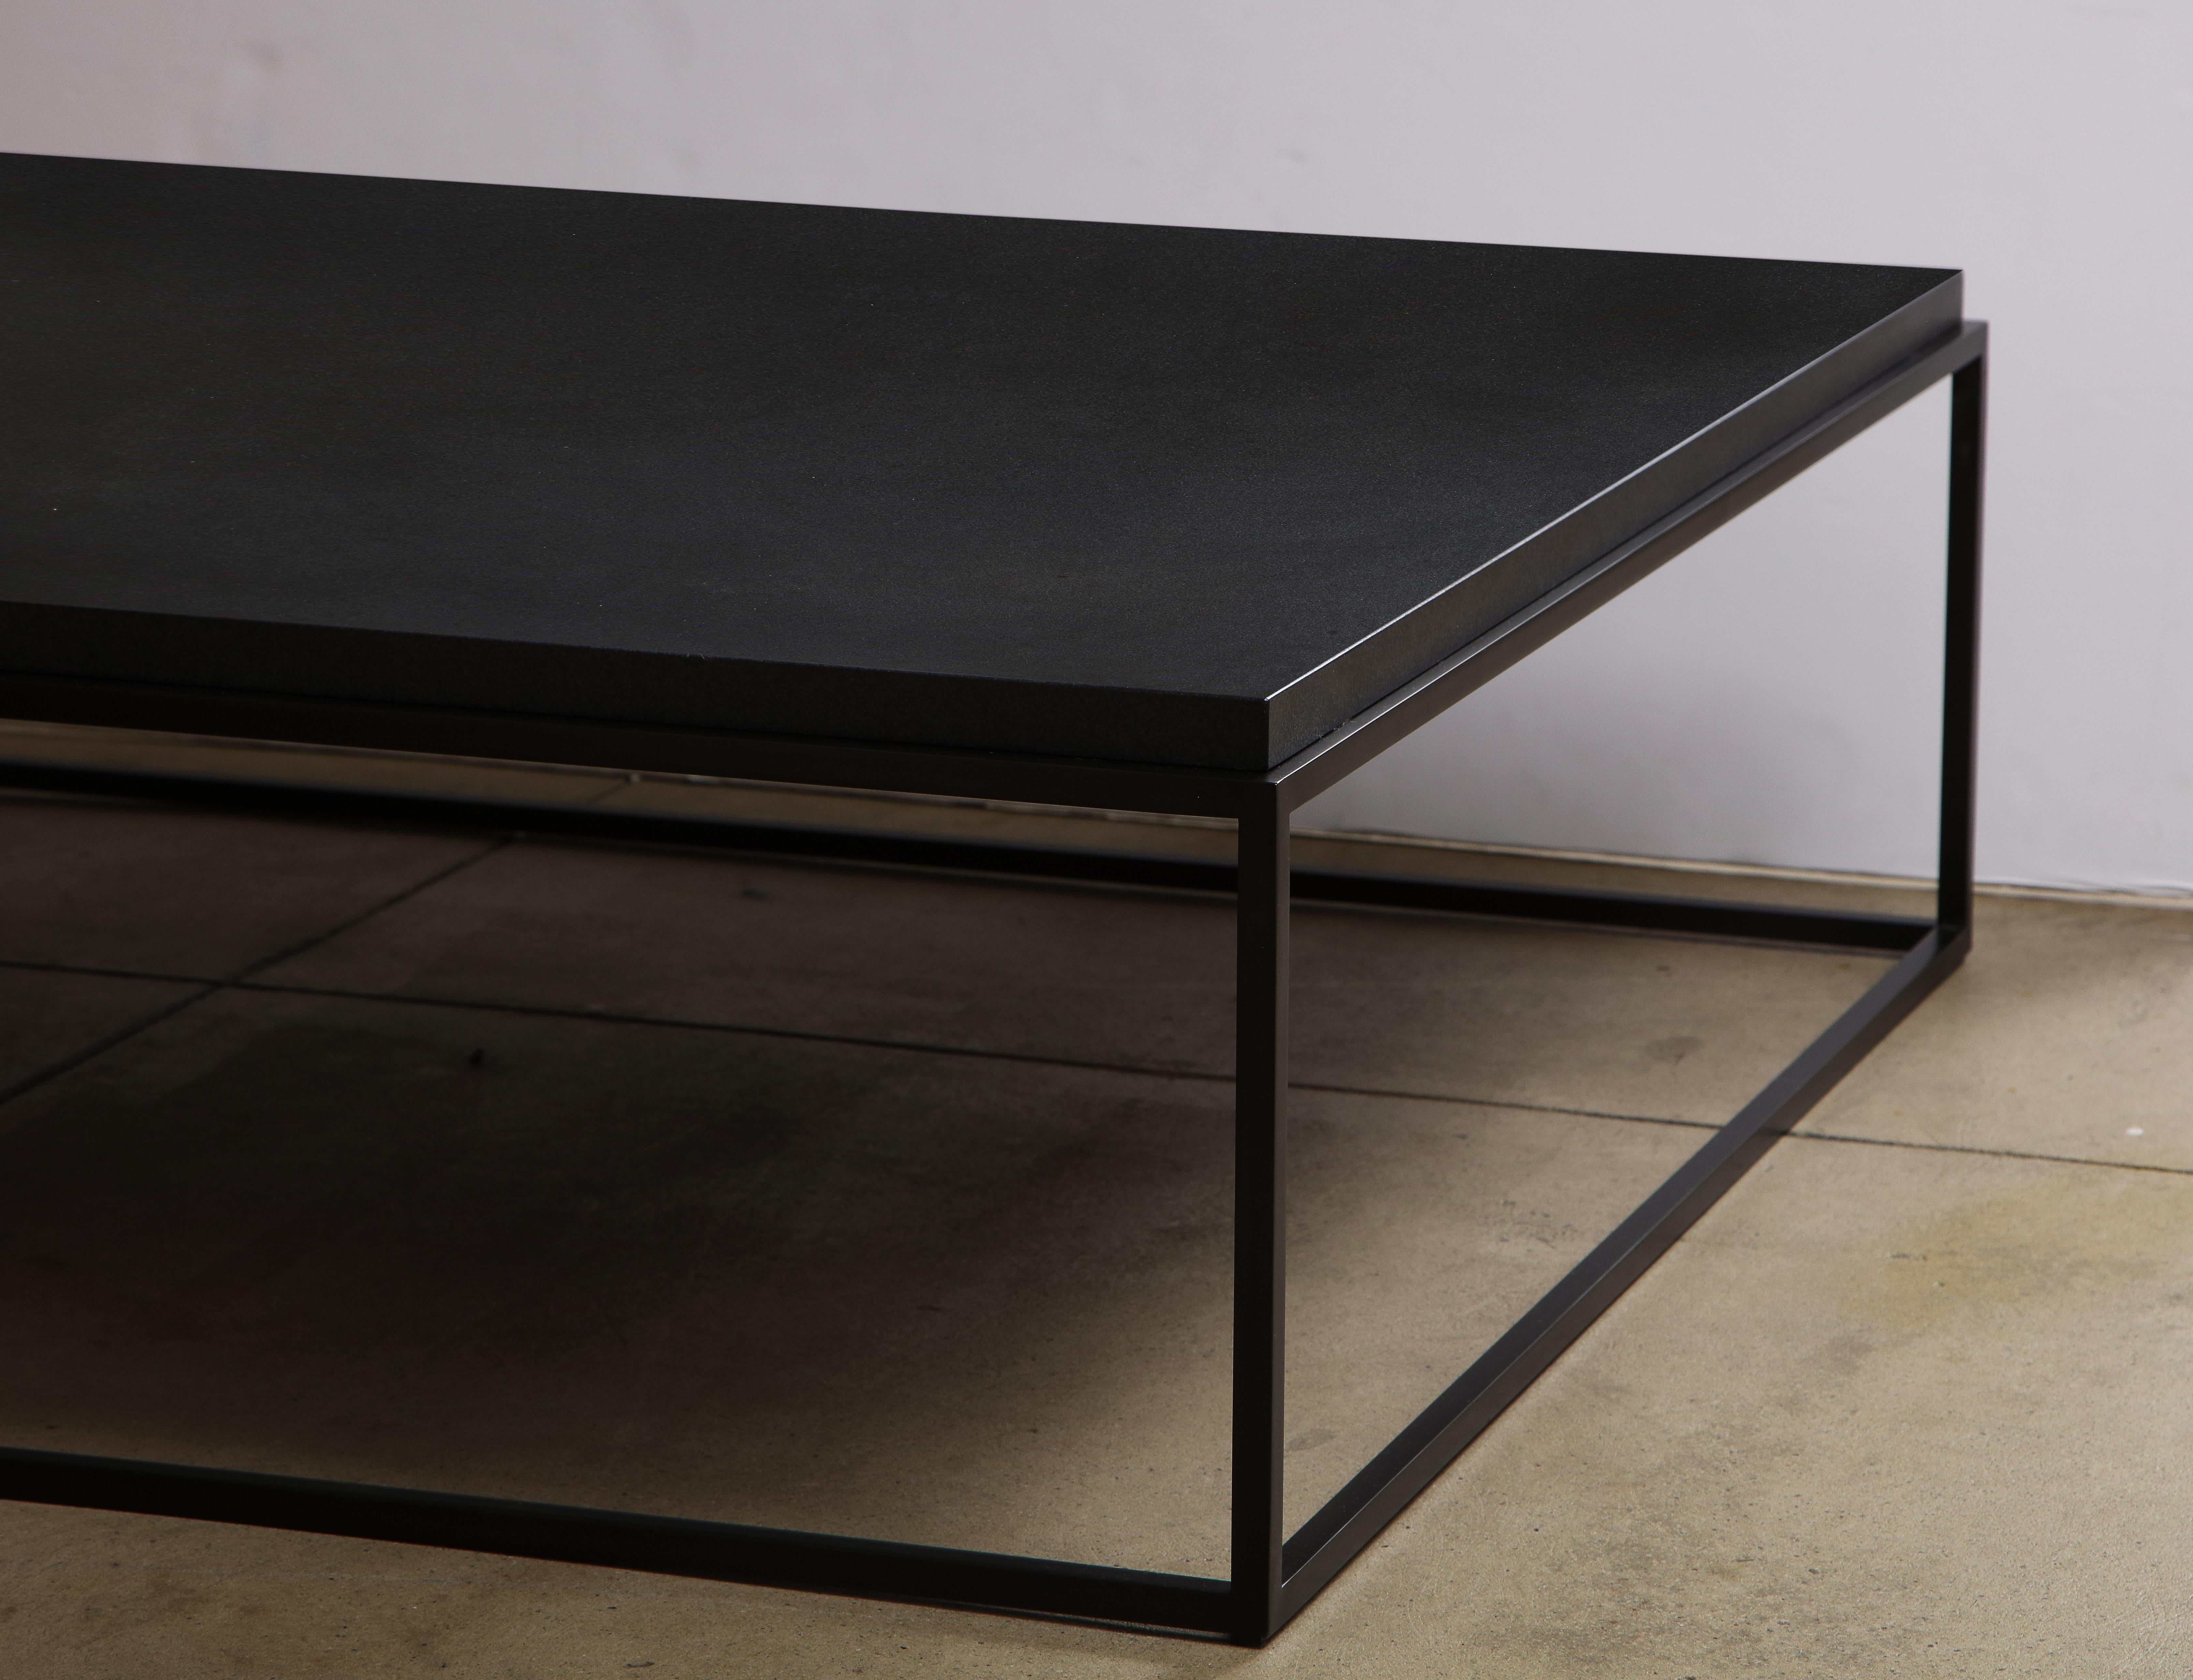 Made to order inset thick stone top coffee table
Metal base, thick black stone textured leather finished marble top
Available in various materials, sizes & finishes
*We also make these in stainless steel and powder coat for outdoors.